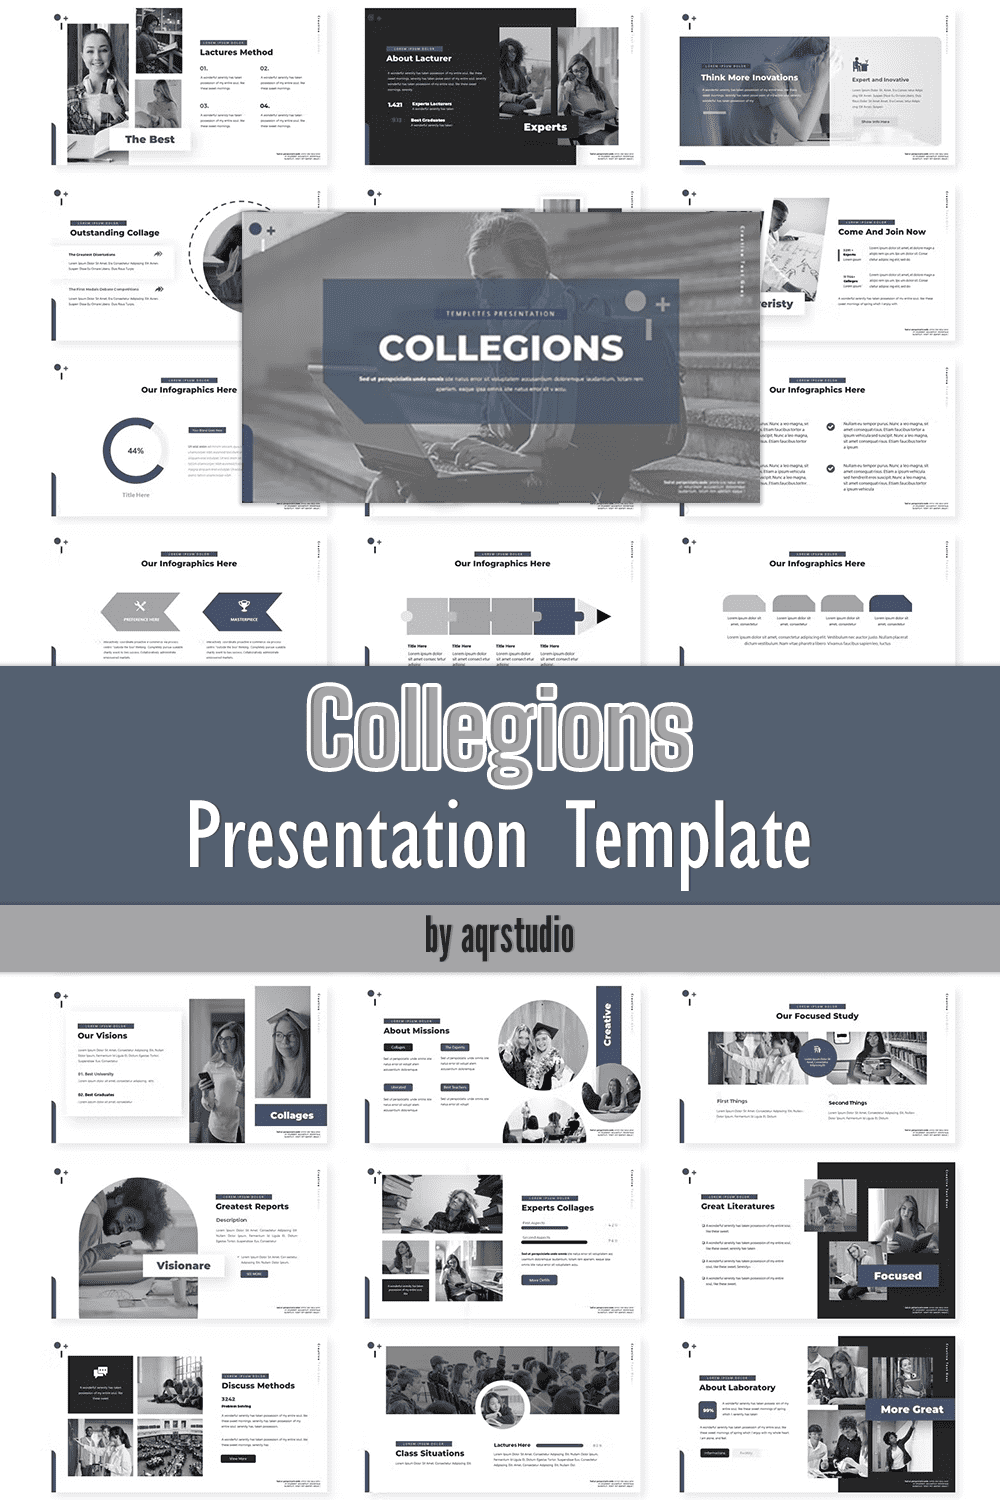 Collegions Presentation Template - pinterest image preview.